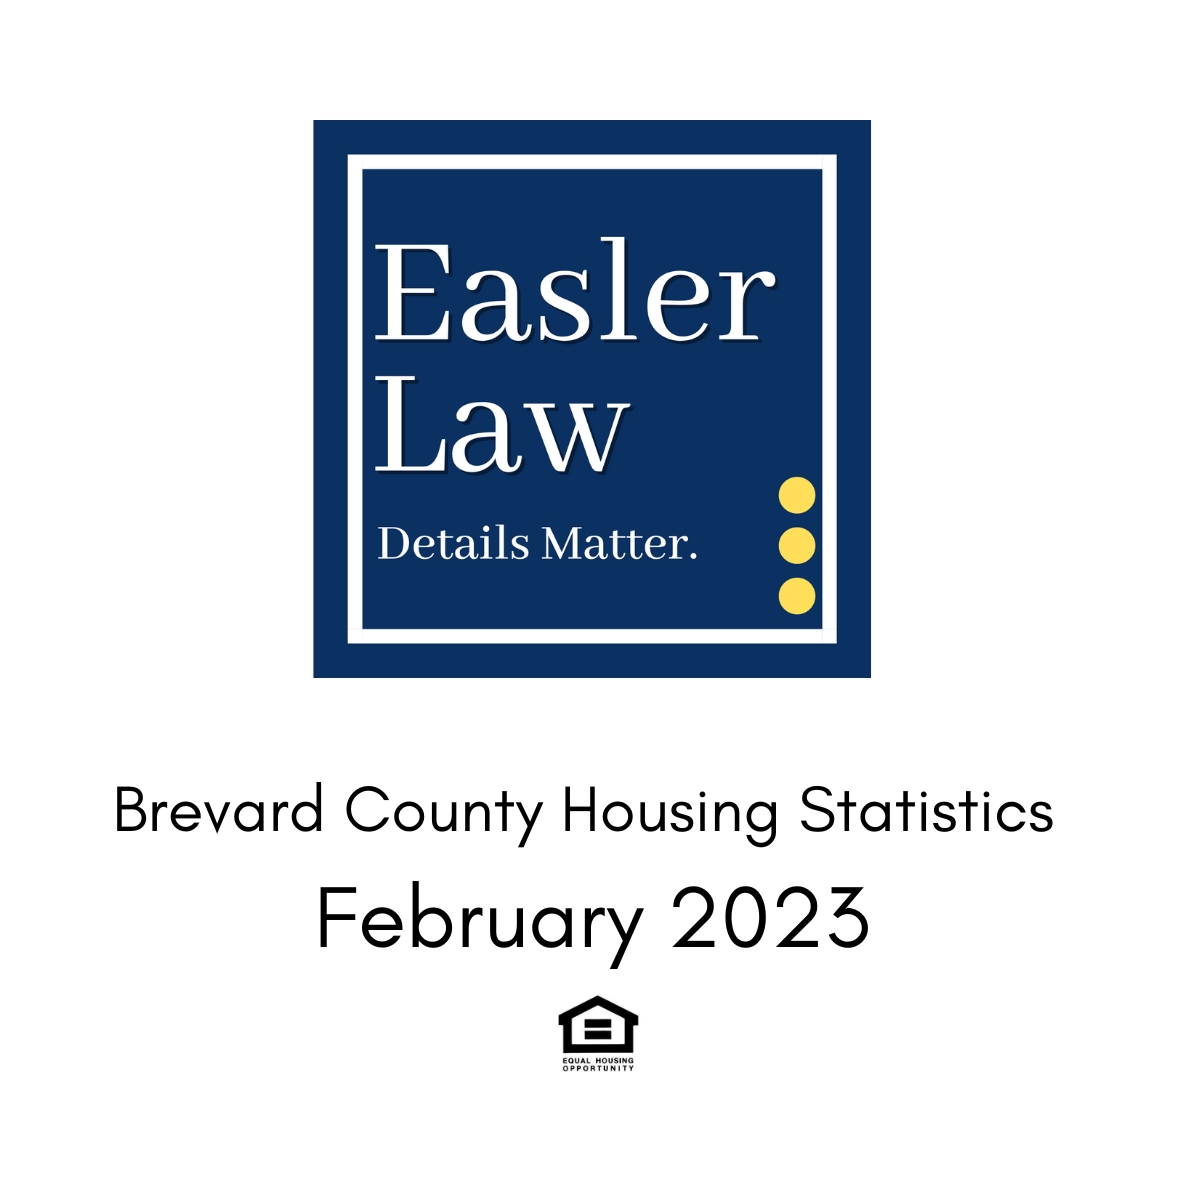 Brevard County Real Estate Market February: A Closer Look at the Latest Trends